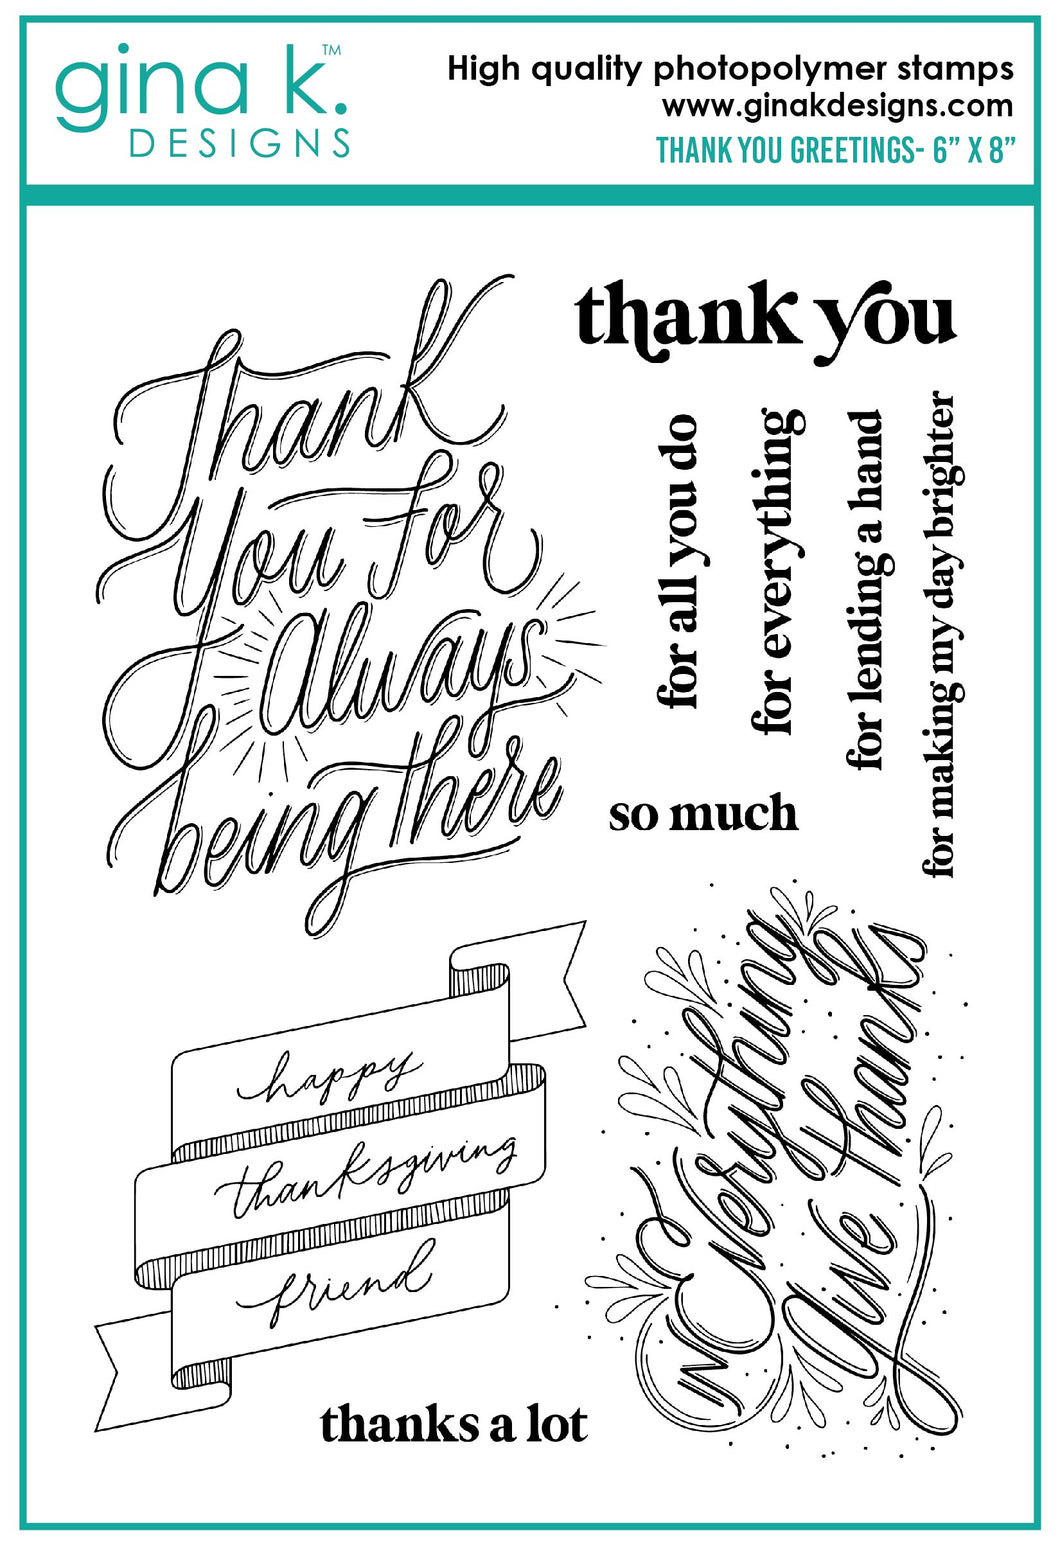 Gina K. Designs - Stamps & Die Set  - Thank You Greetings. Thank You Greetings is a stamp & die set by Emily Loggans. This set is made of premium clear photopolymer and measures 6